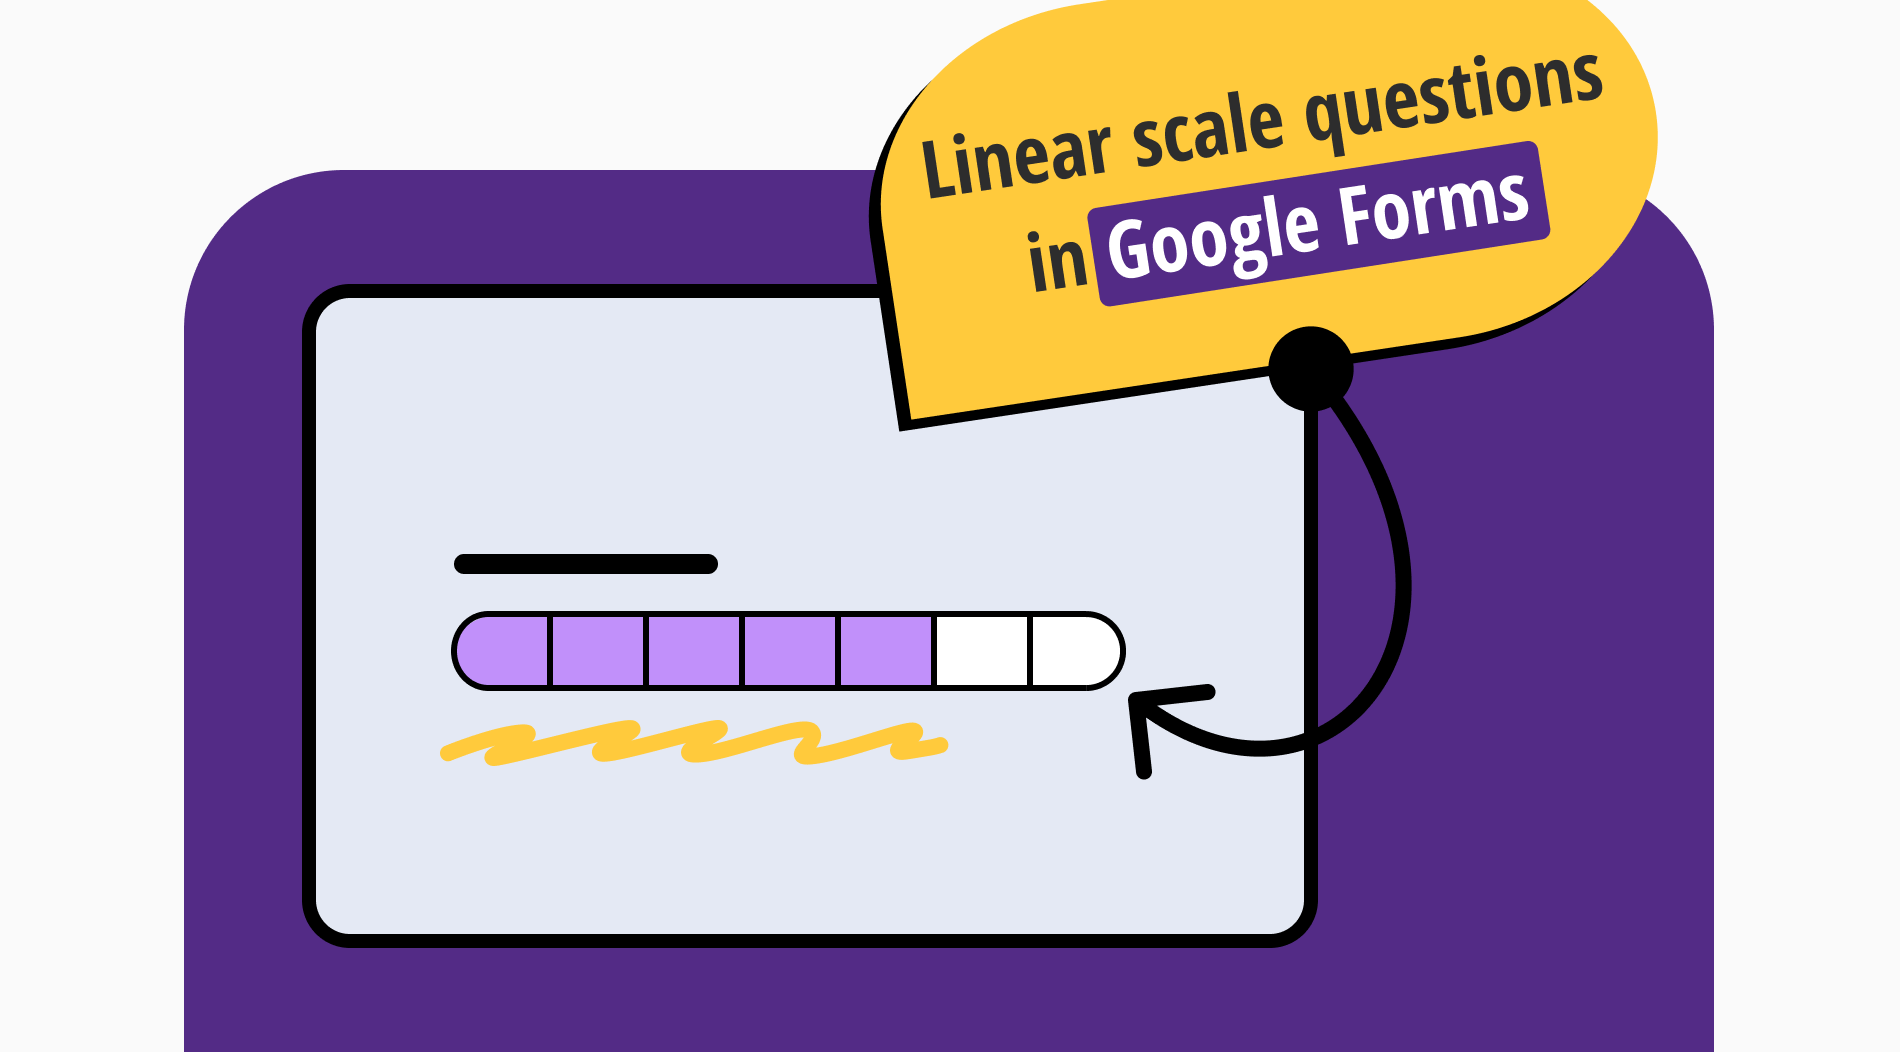 How to add a linear scale question in Google Forms